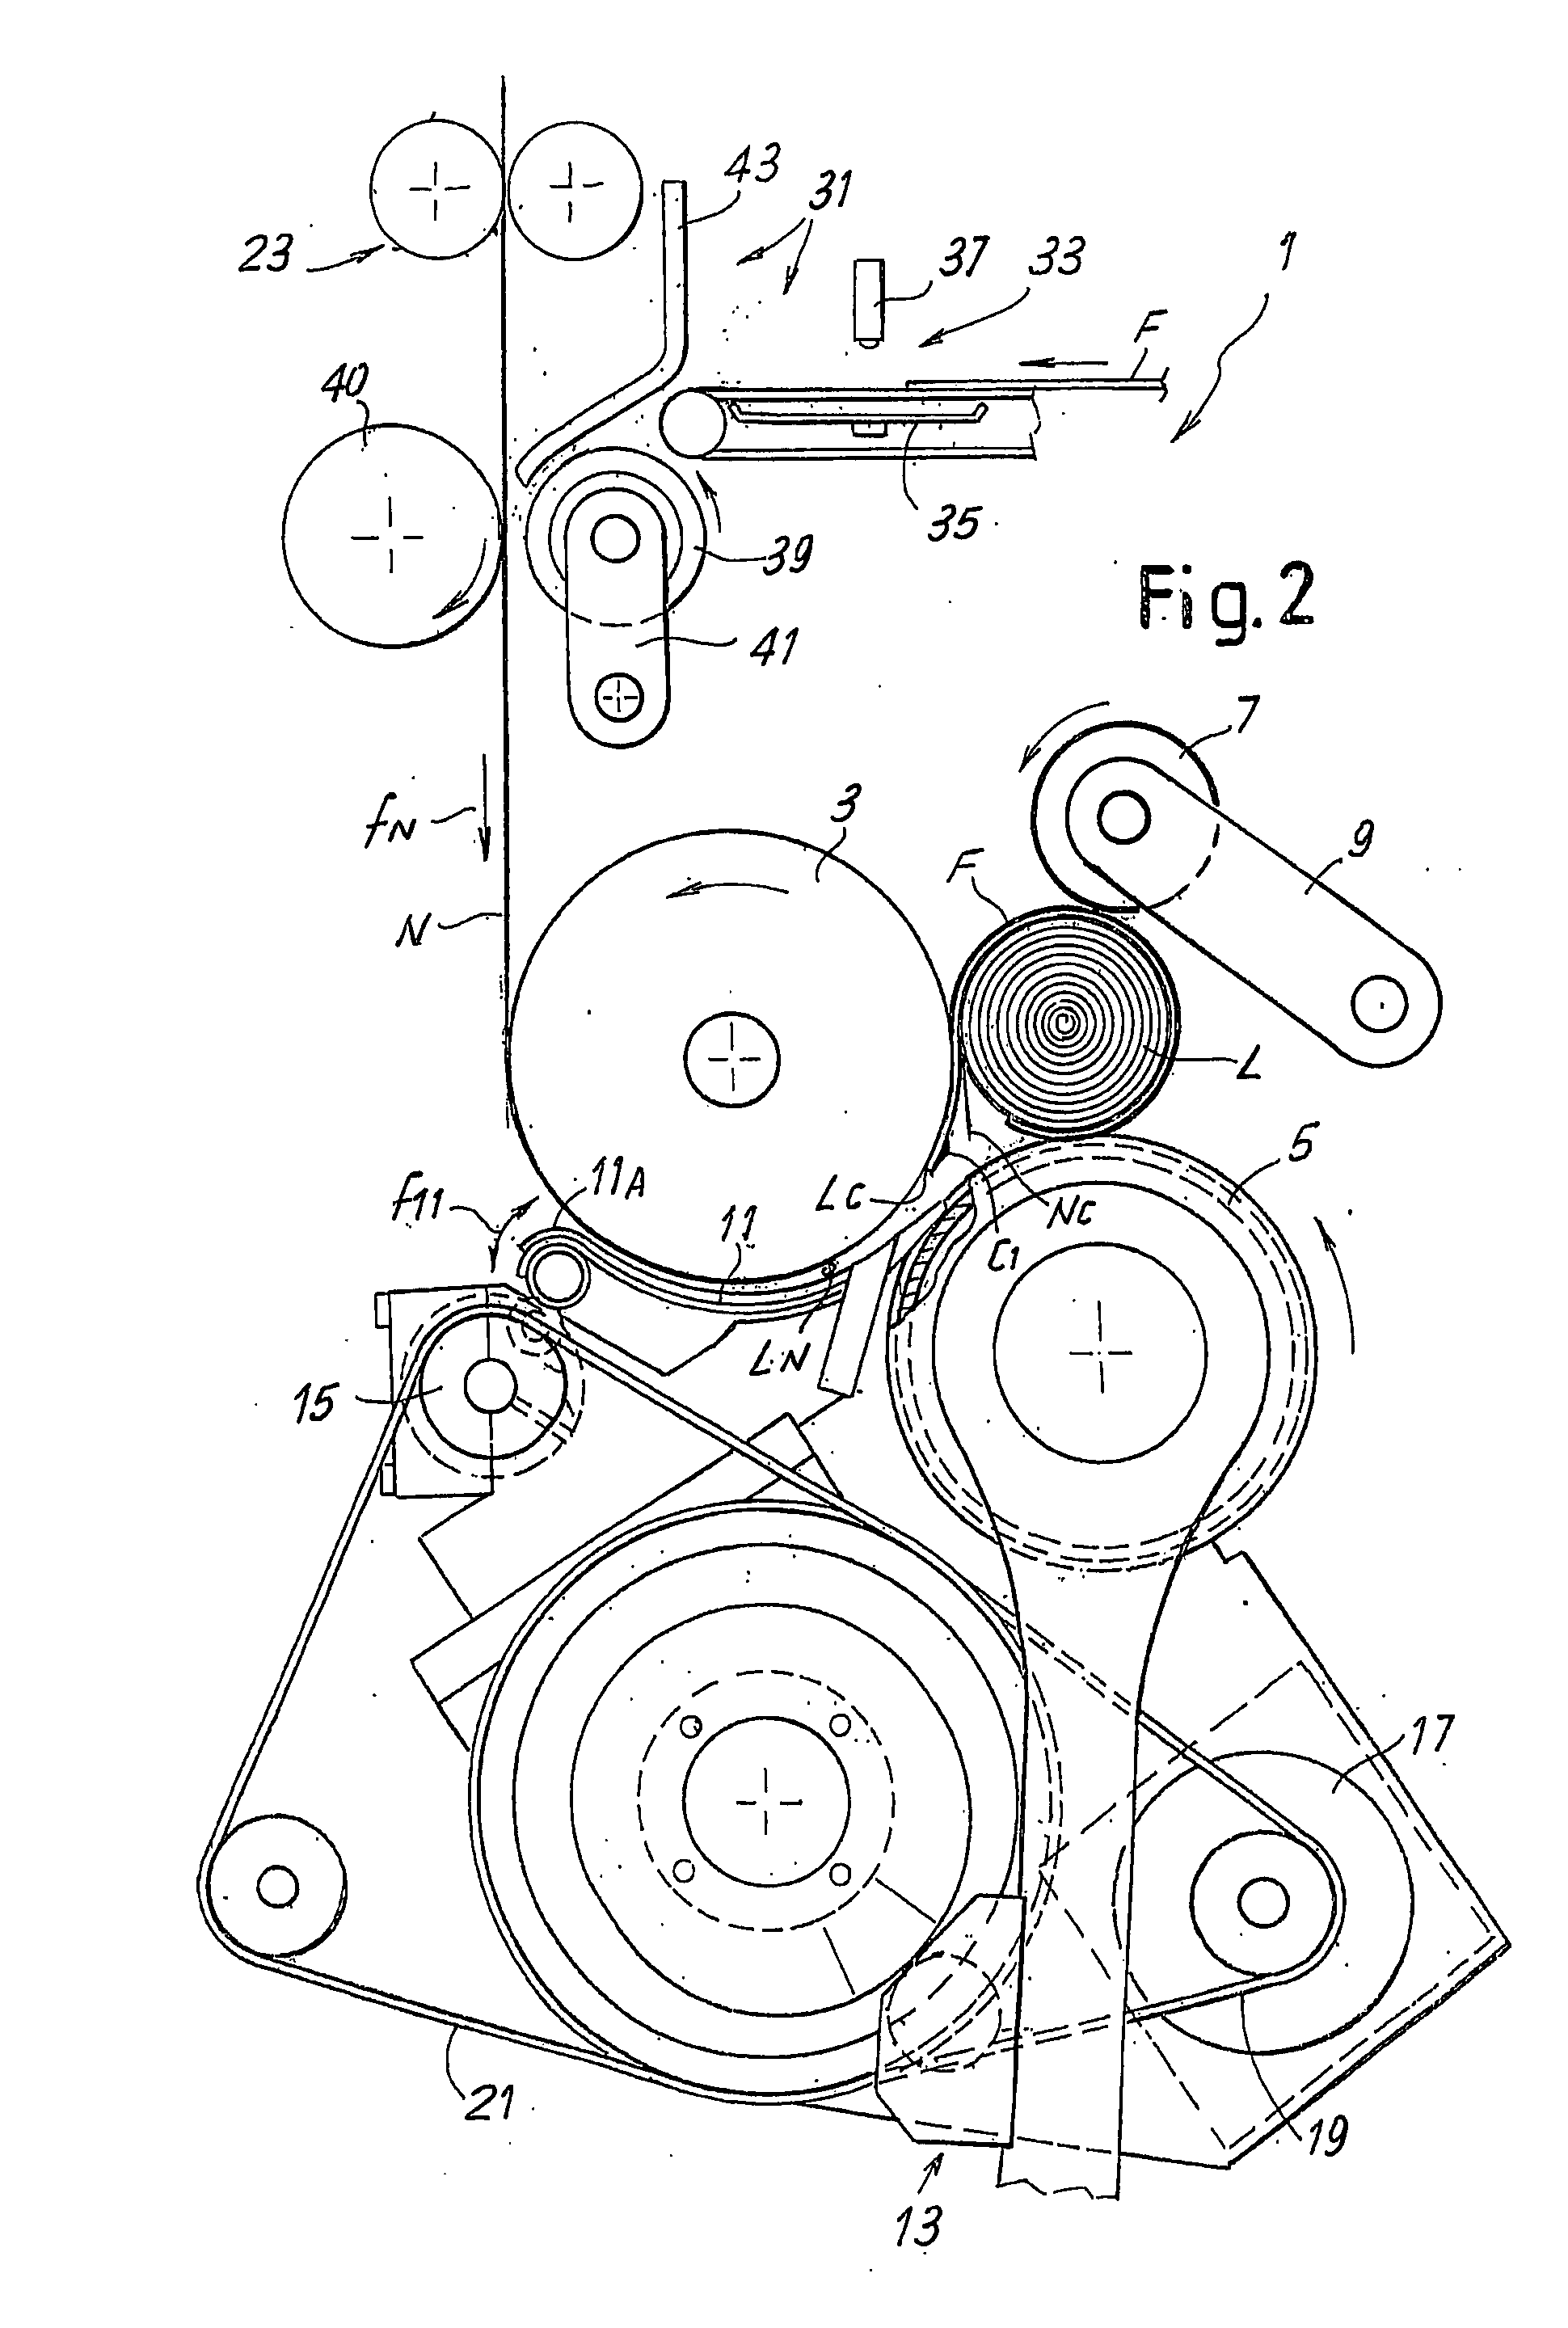 Method and device for manufacturing rolls of web material with an outer wrapping